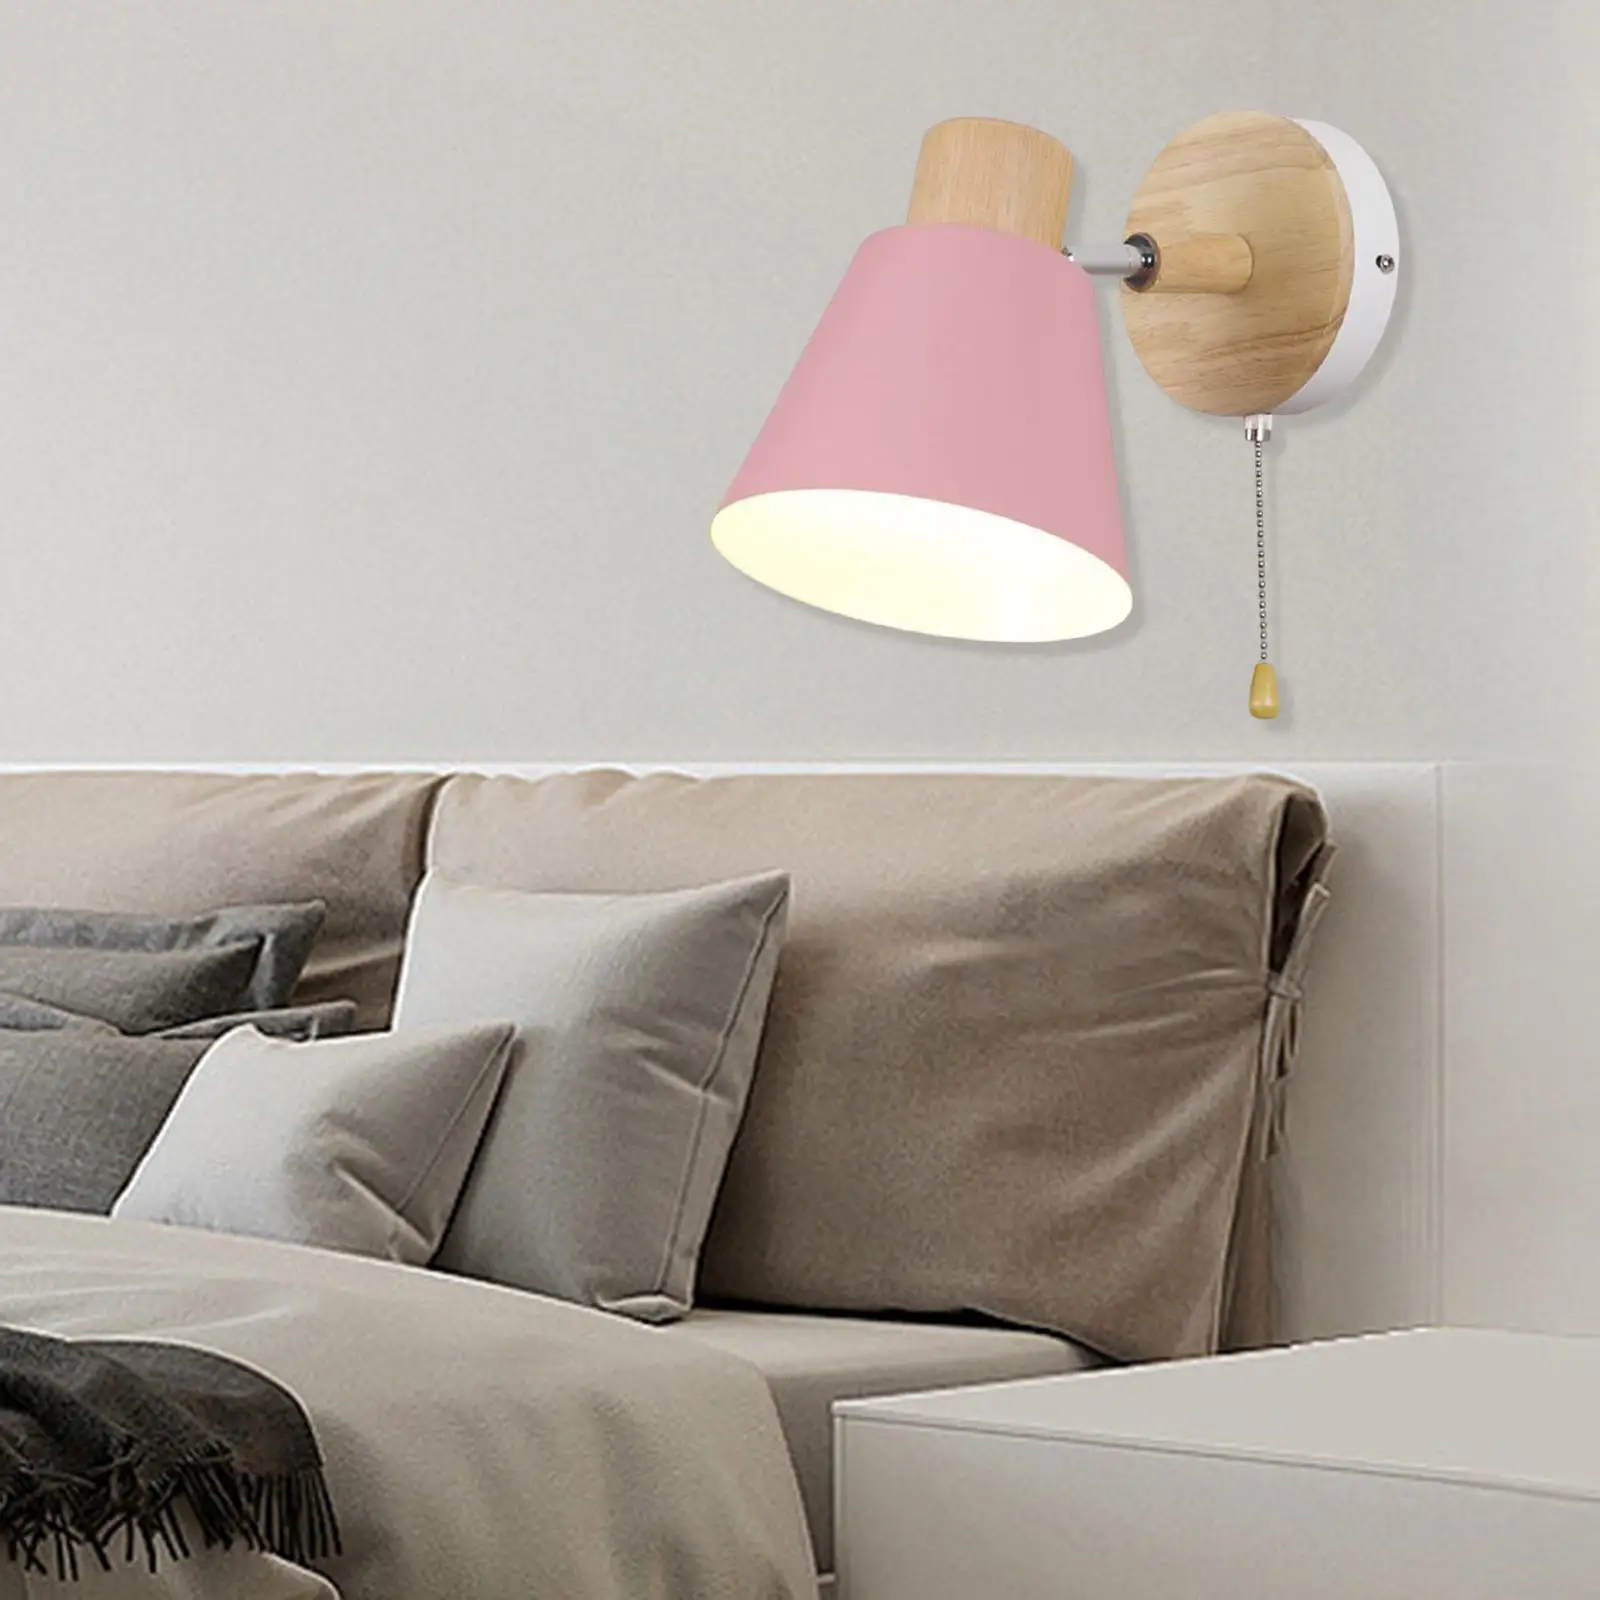 Modern Wall Lamp Light Sconce Bedside Lamp Creative with Pull Cord Switch Adjustable Lighting Fixture for Kitchen Bedroom Decor